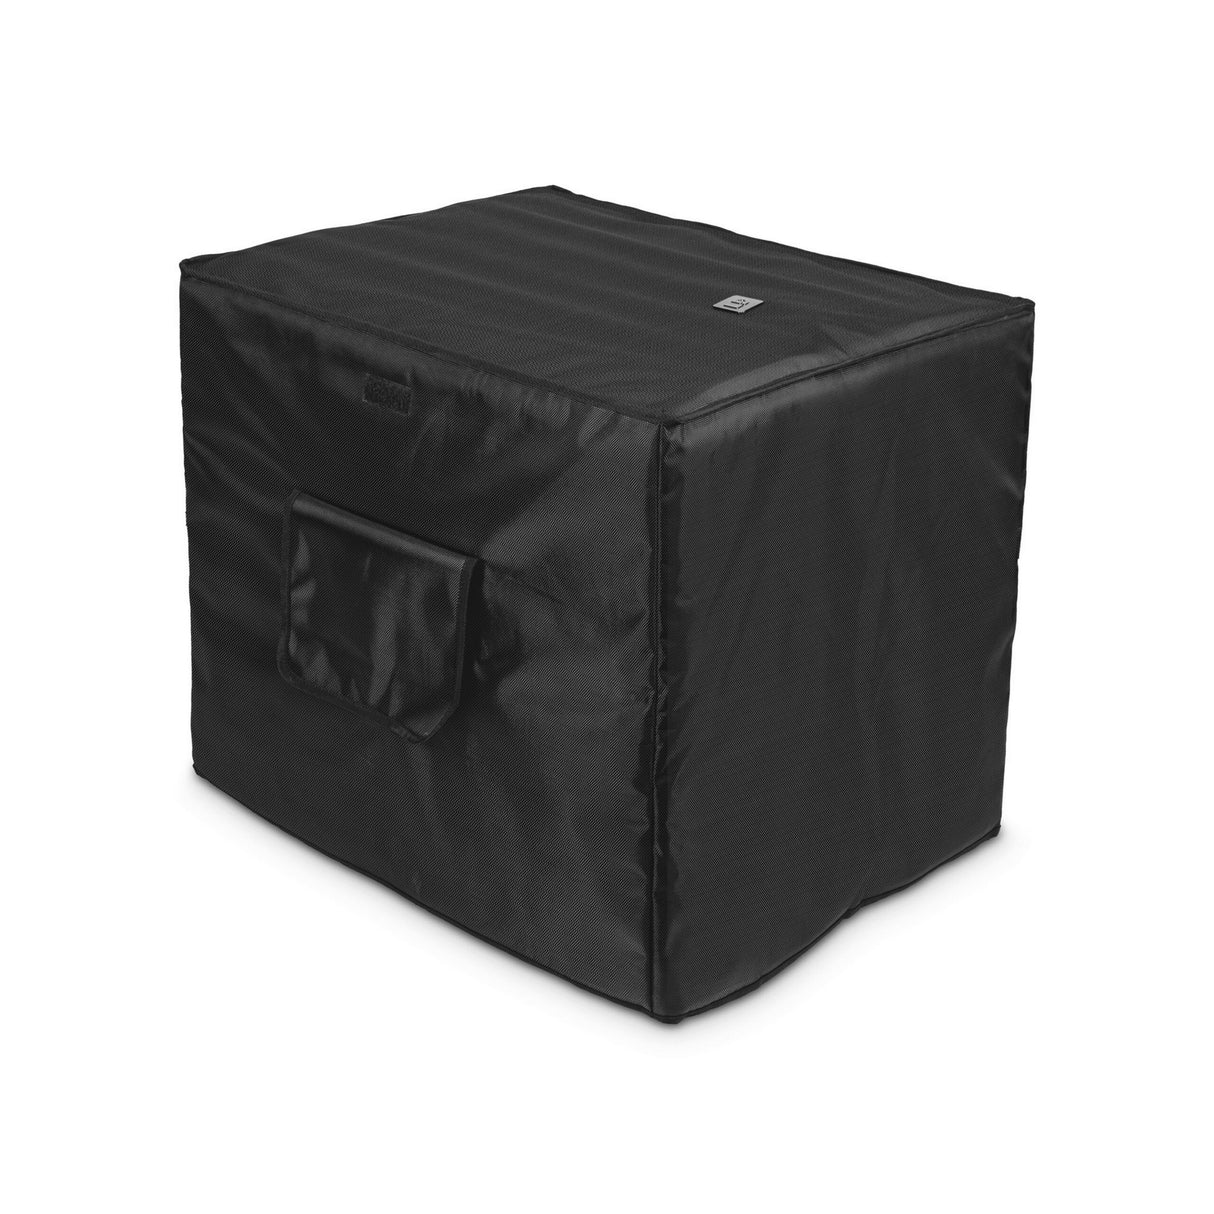 LD Systems ICOA SUB 18 PC Padded Protective Cover for ICOA Subwoofer 18